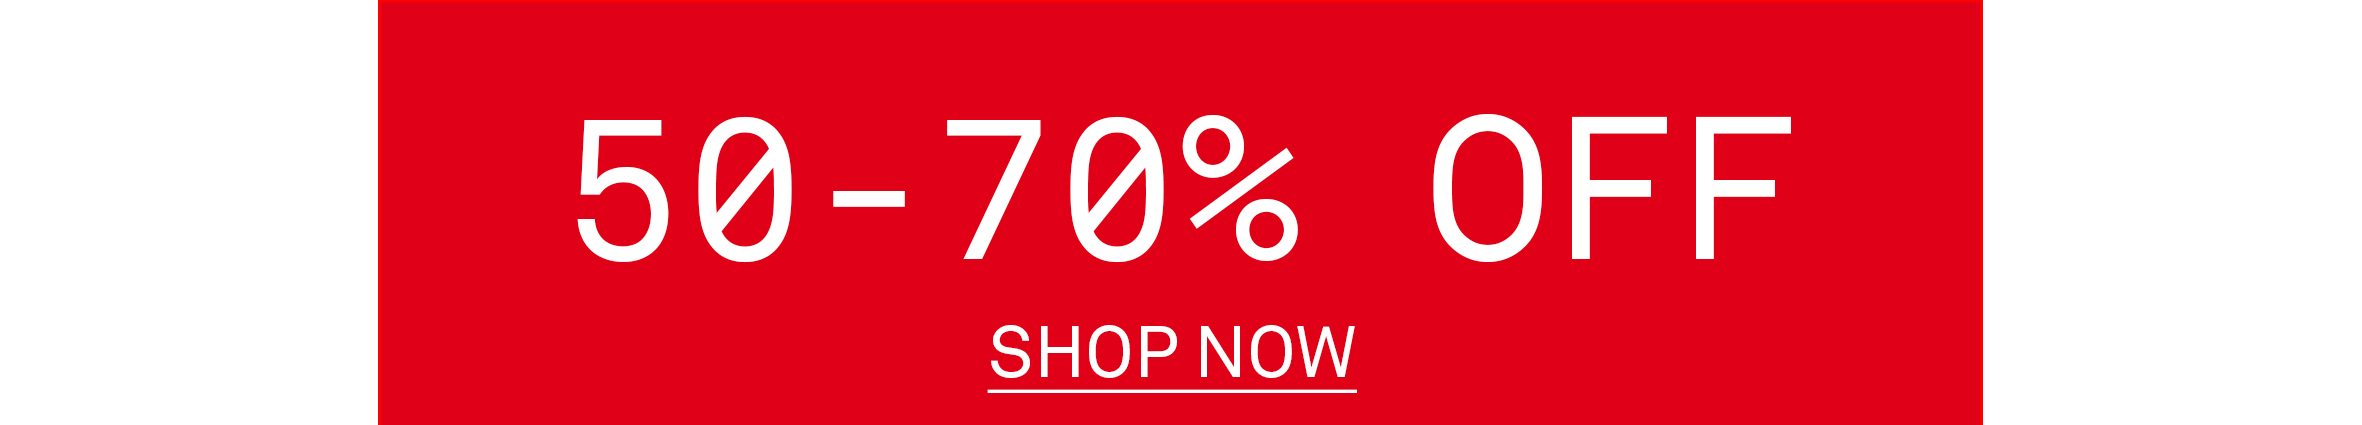 50 TO 70% OFF